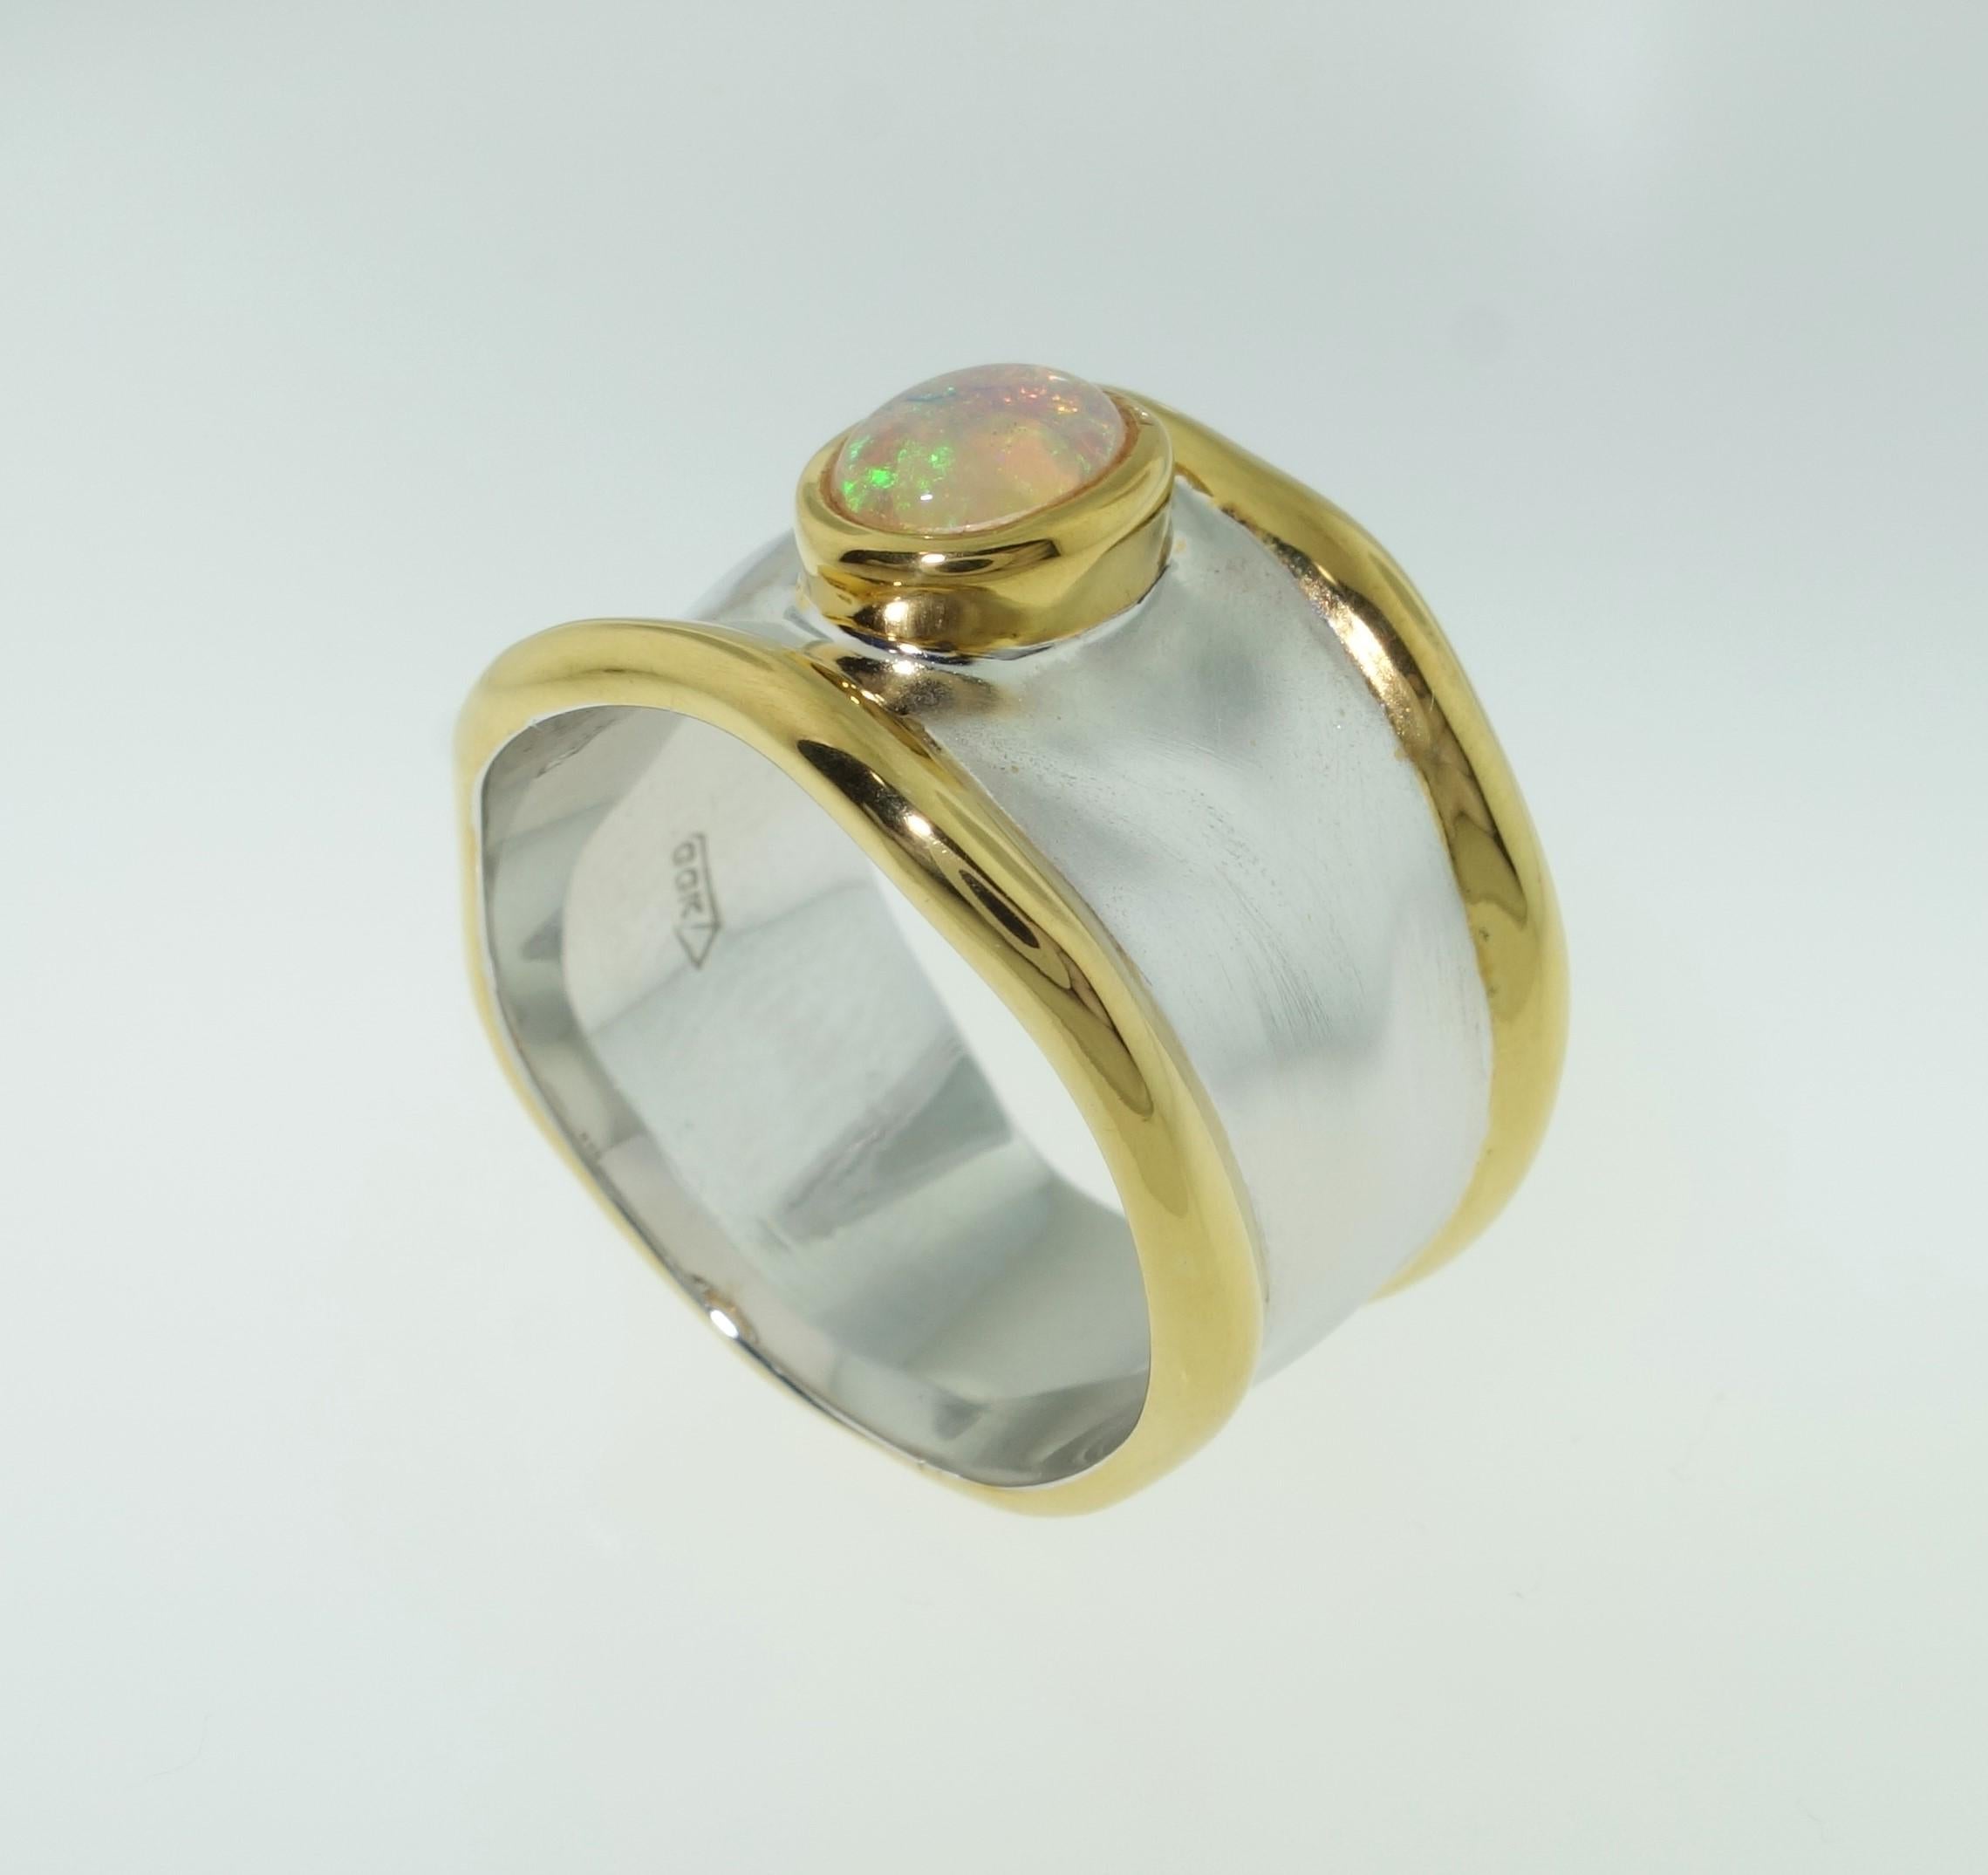 Beautiful solitaire ring featuring an Ethiopian Opal;  approx.  .42 carat; Sterling Silver Tarnish-resistant Rhodium and gold plated accents on either side of mounting; Size 8; we offer complimentary ring re-sizing. Classic and Classy…illuminating